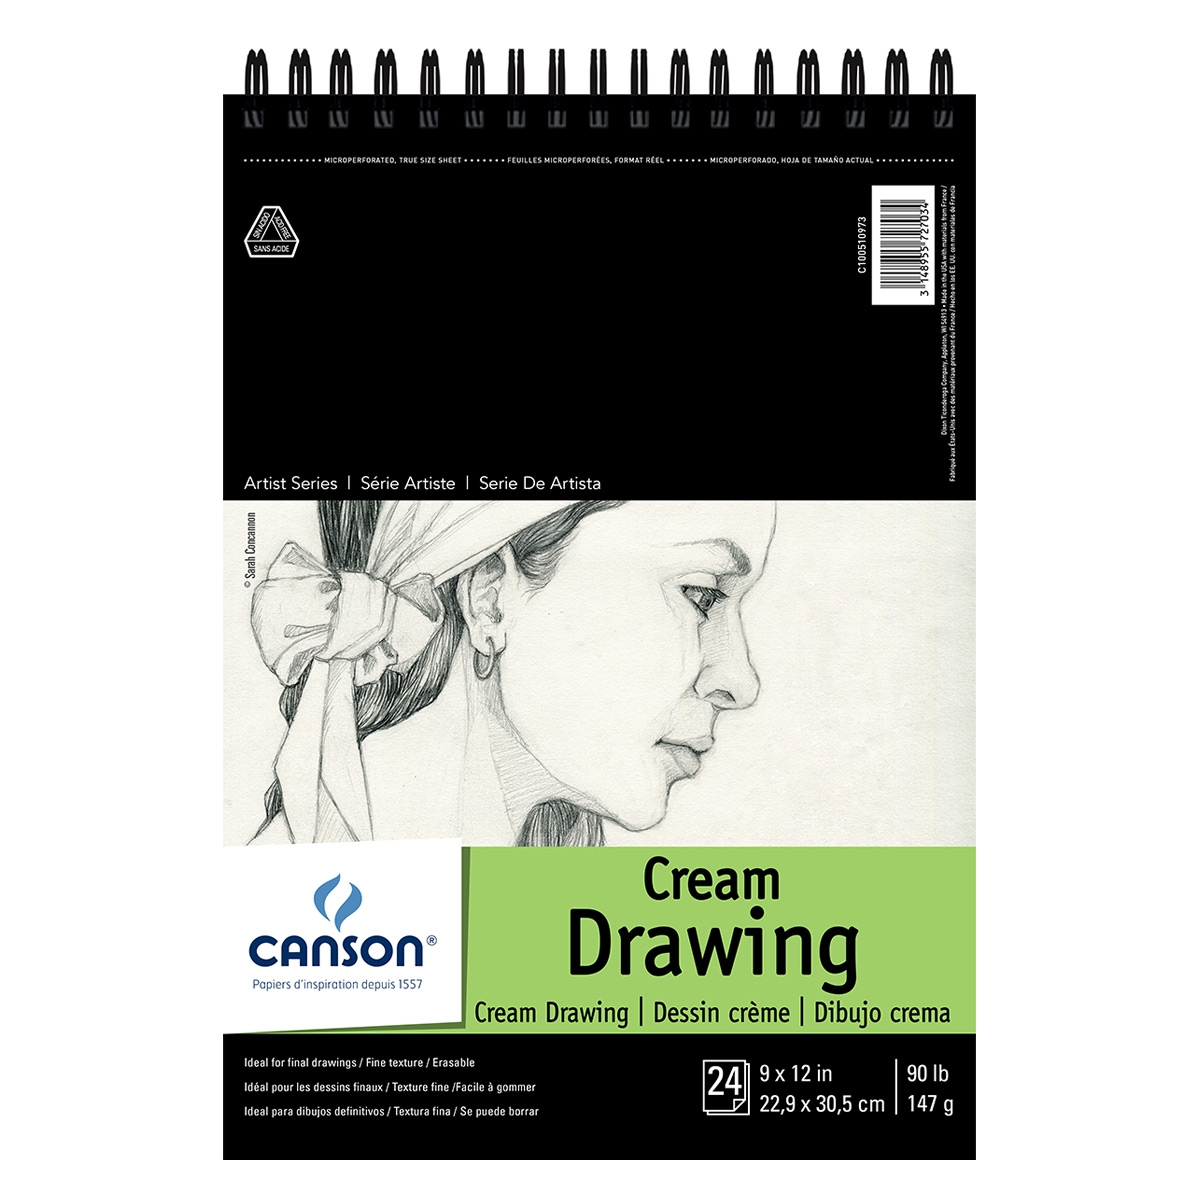 Canson Universal Recycled Sketch Pad, 9x12, 65lb